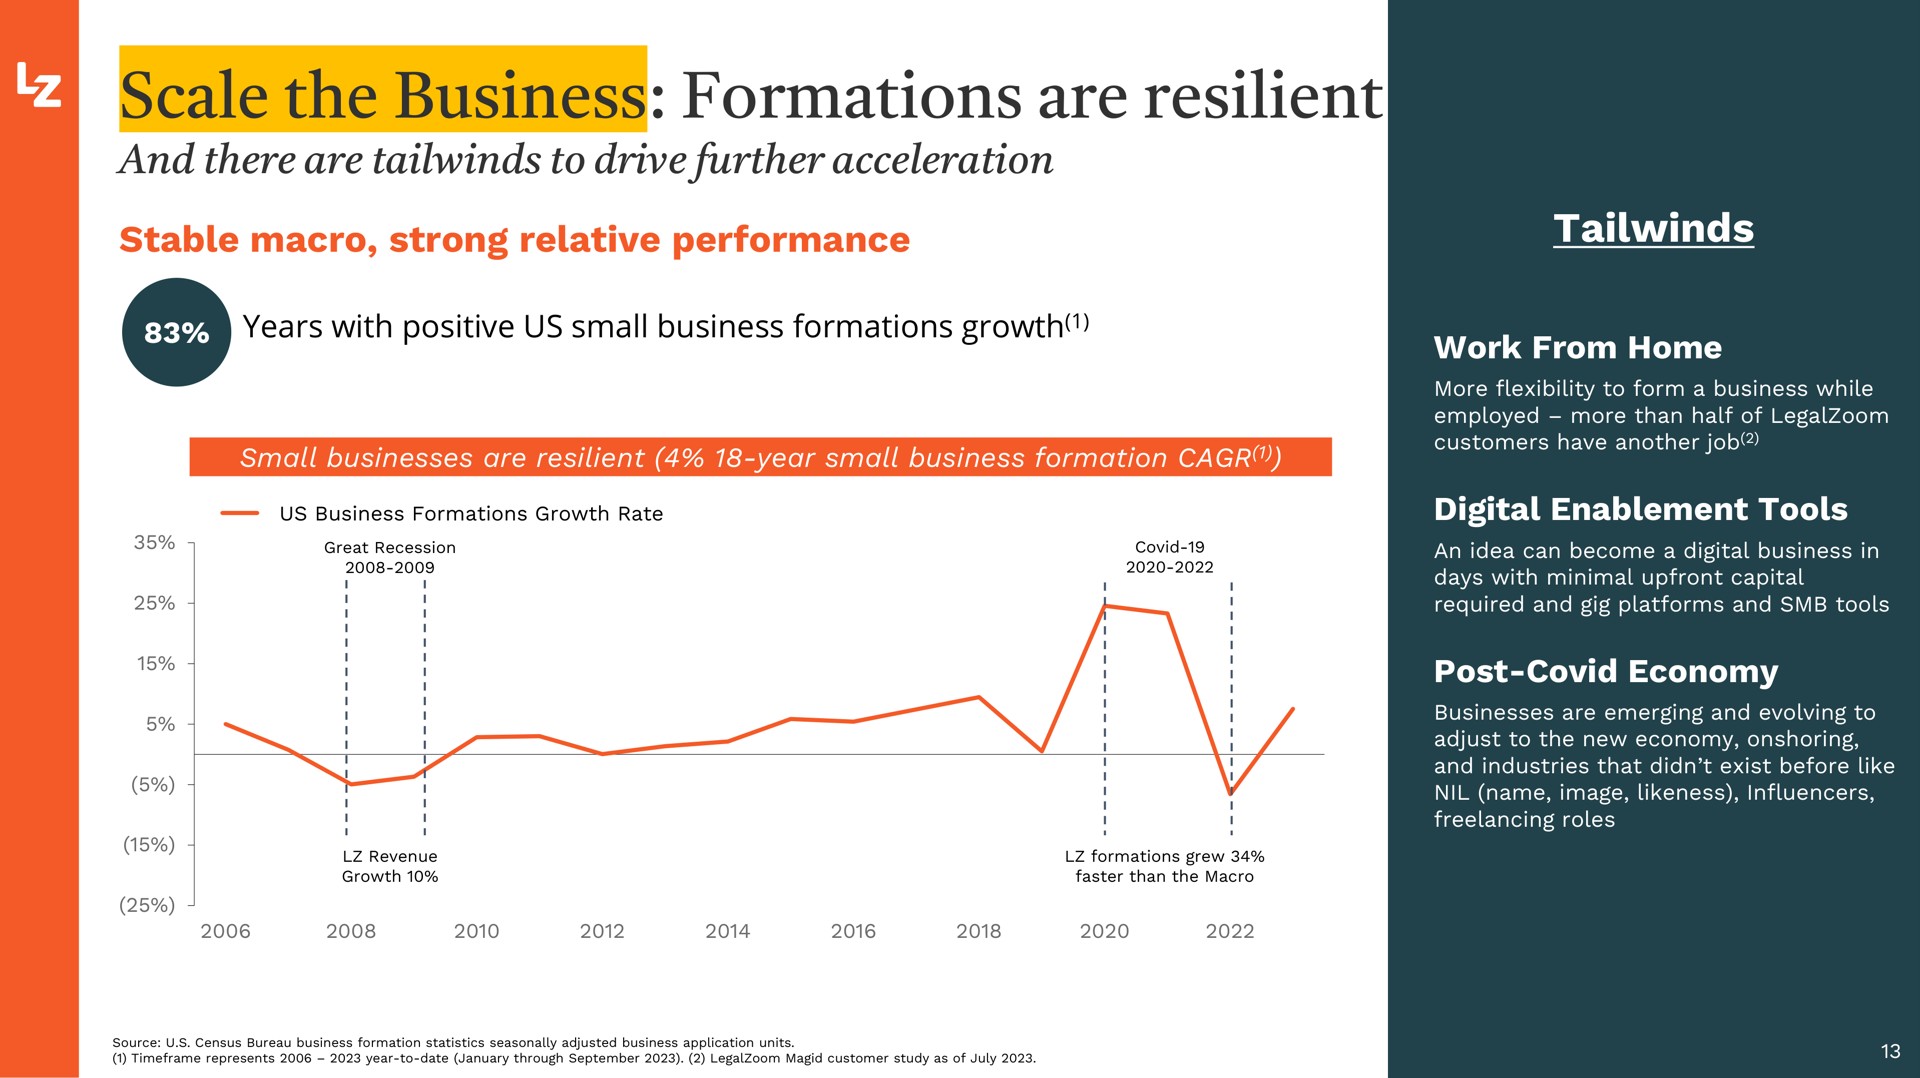 scale the business formations are resilient | LegalZoom.com